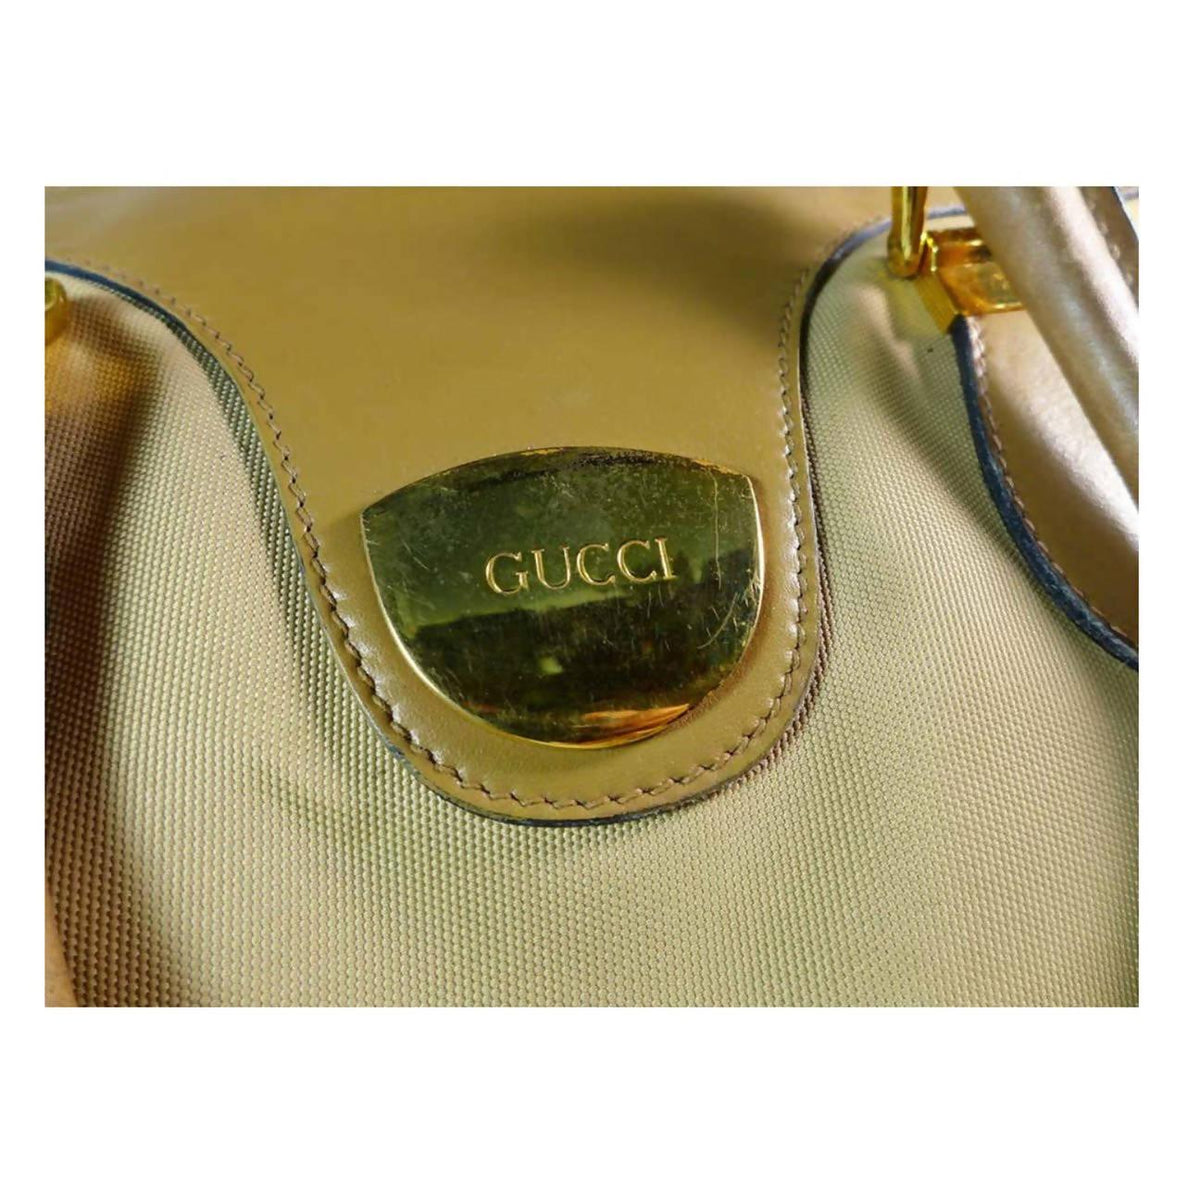 Pre-owned GUCCI Tan Leather and Canvas Shoulder Bag - theREMODA